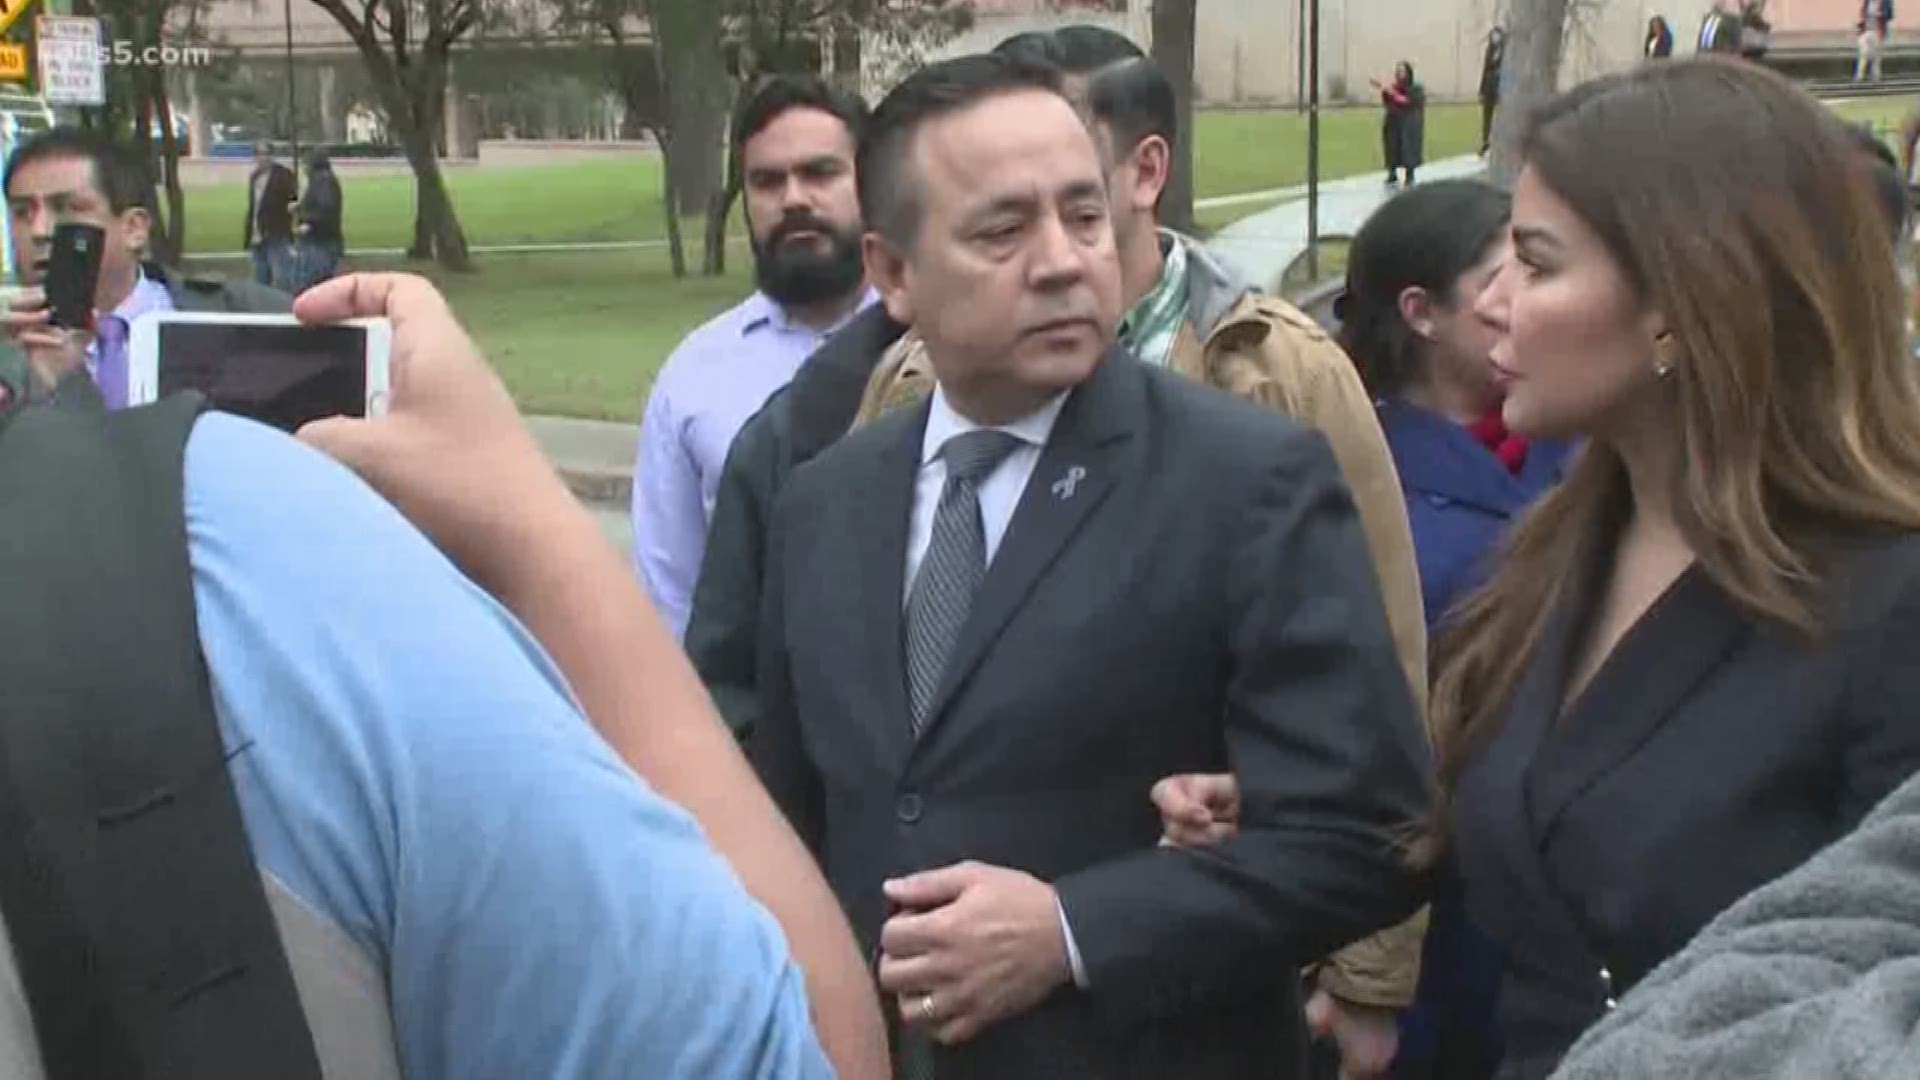 A jury found State Sen. Carlos Uresti and his former business partner guilty of all the counts they were facing involving fraud.